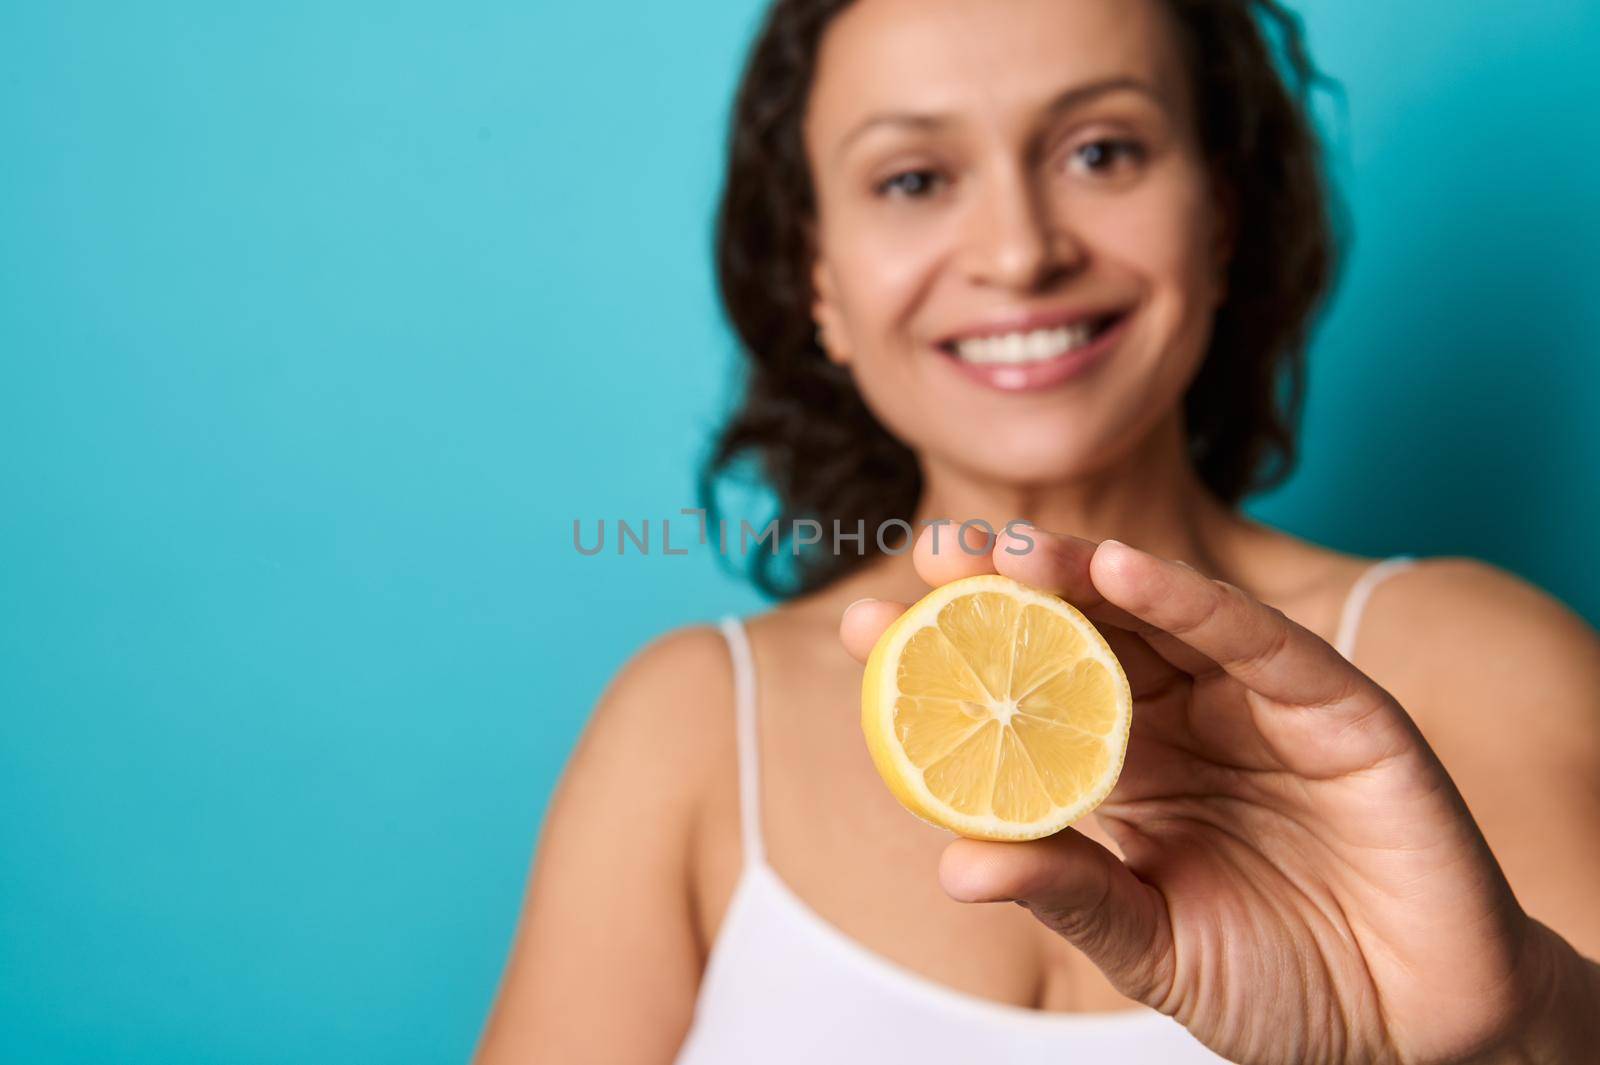 Beauty portrait of attractive cheerful smiling young woman with curly dark hair in white top isolated on bright blue background holding halves of lemon and covering her eyes with it. Copy ad space by artgf